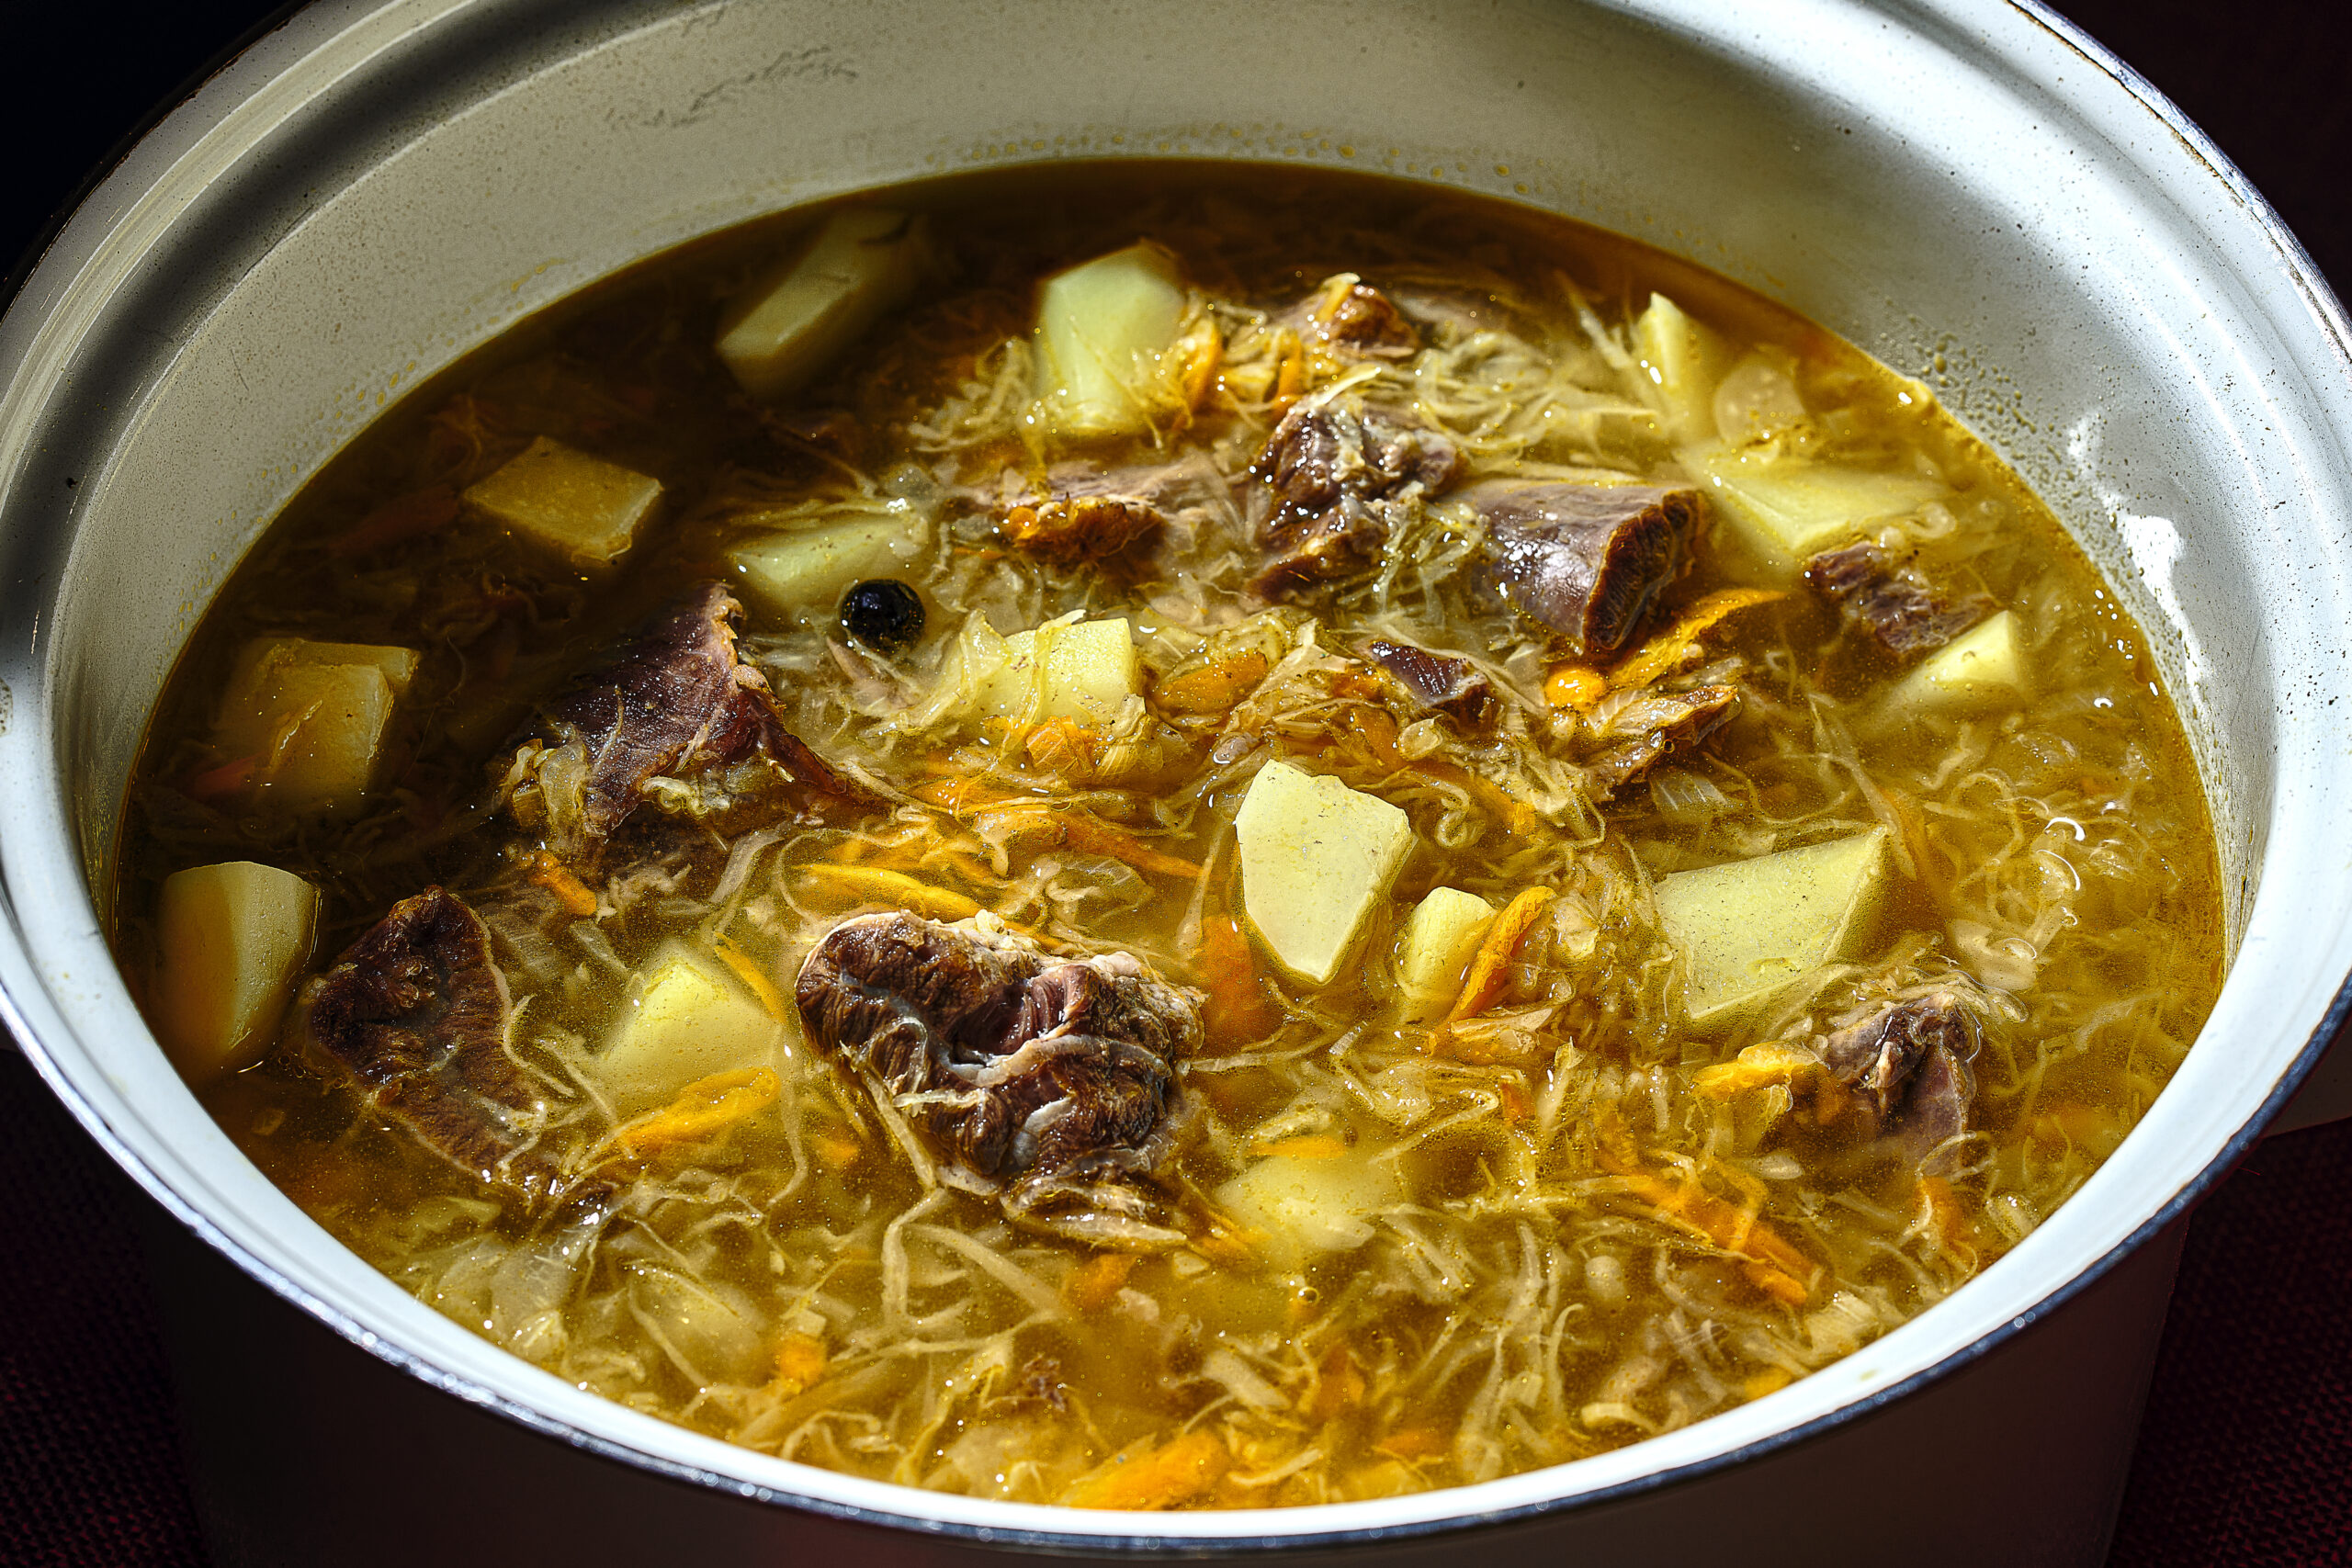 Enamel pot of Russian cabbage soup with potato and meat chunks